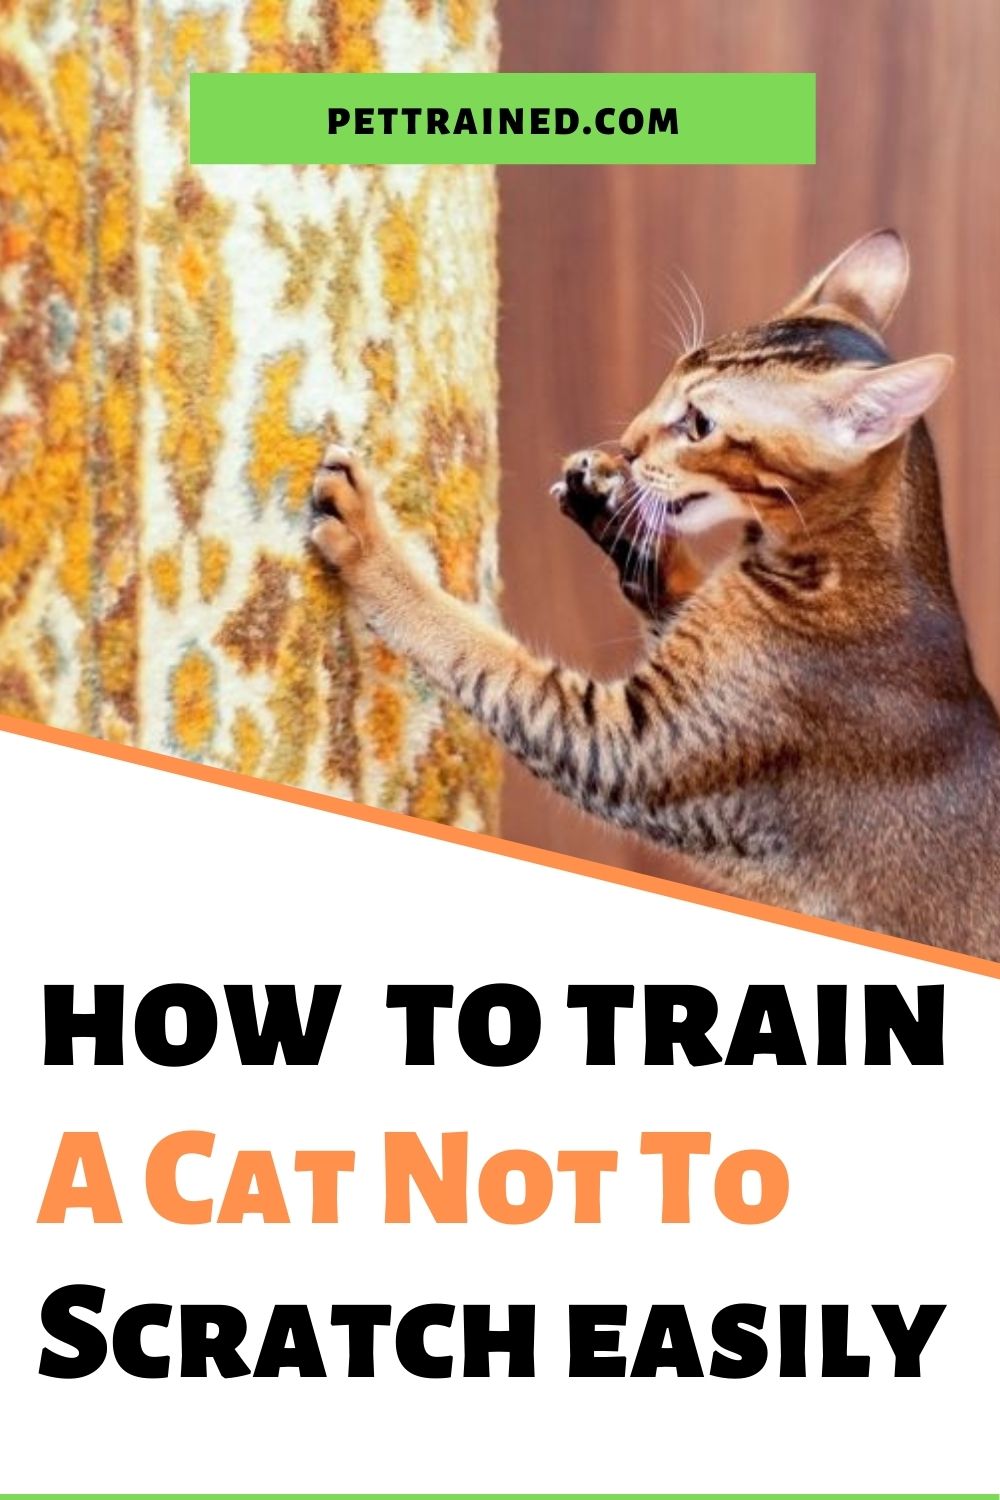 How to train a cat not to scratch easily